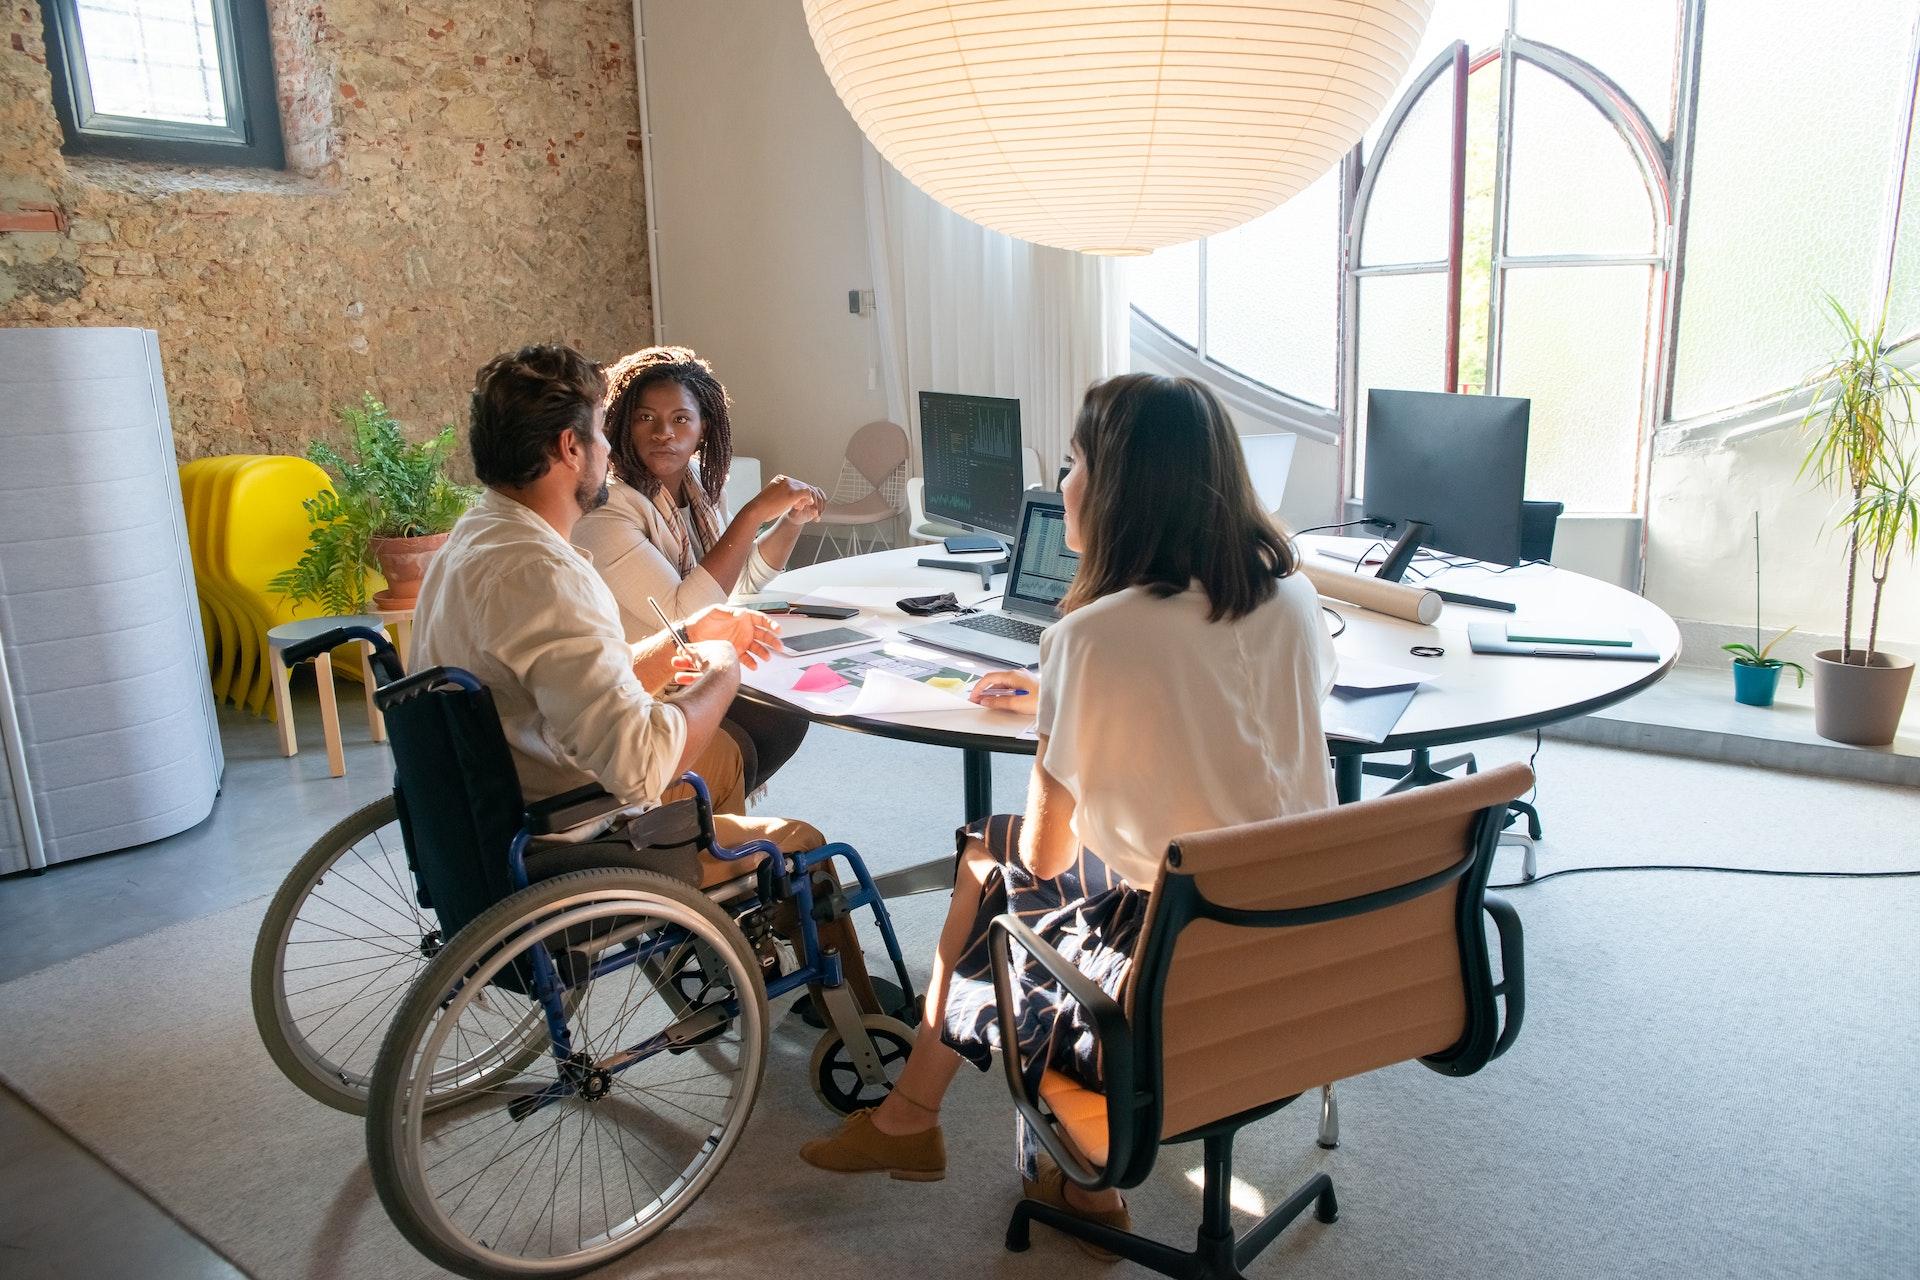 Factors Parents With Disabilities should consider before Starting a Business